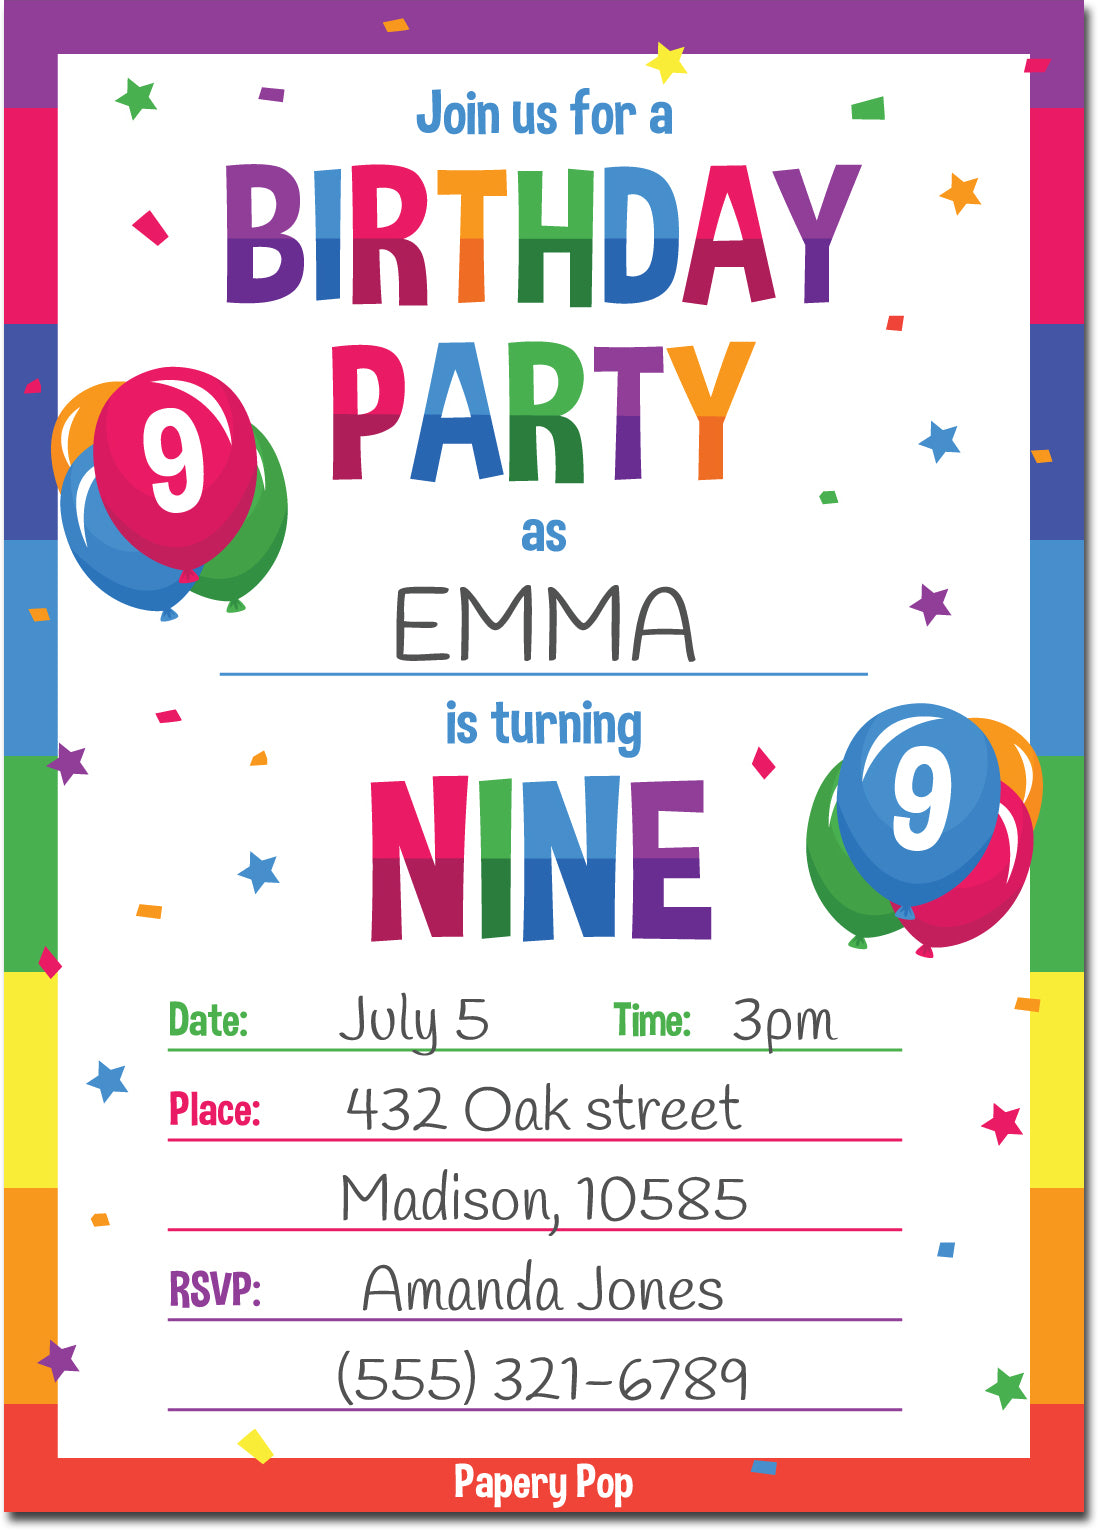 9 Year Old Birthday Party Invitations with Envelopes (15 Count) - Kids